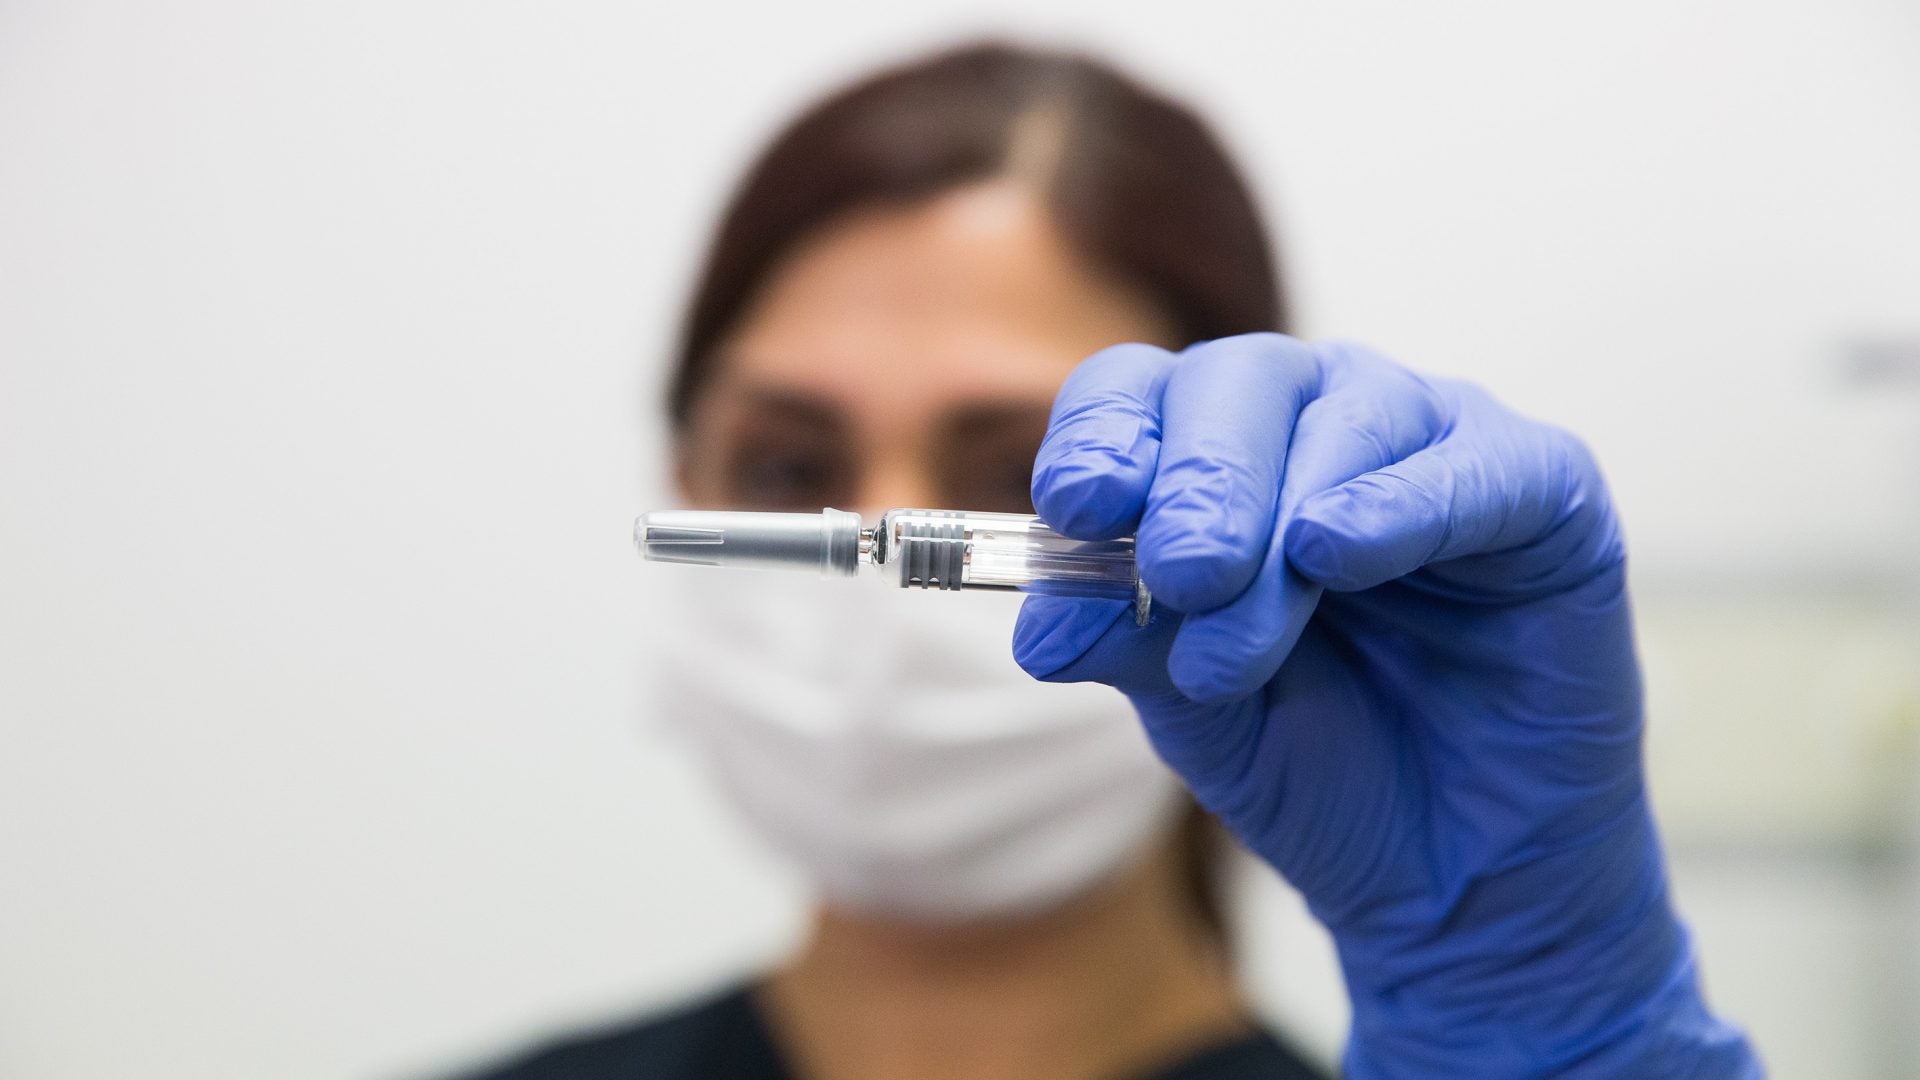 Here's When A COVID-19 Vaccine Could Be Available